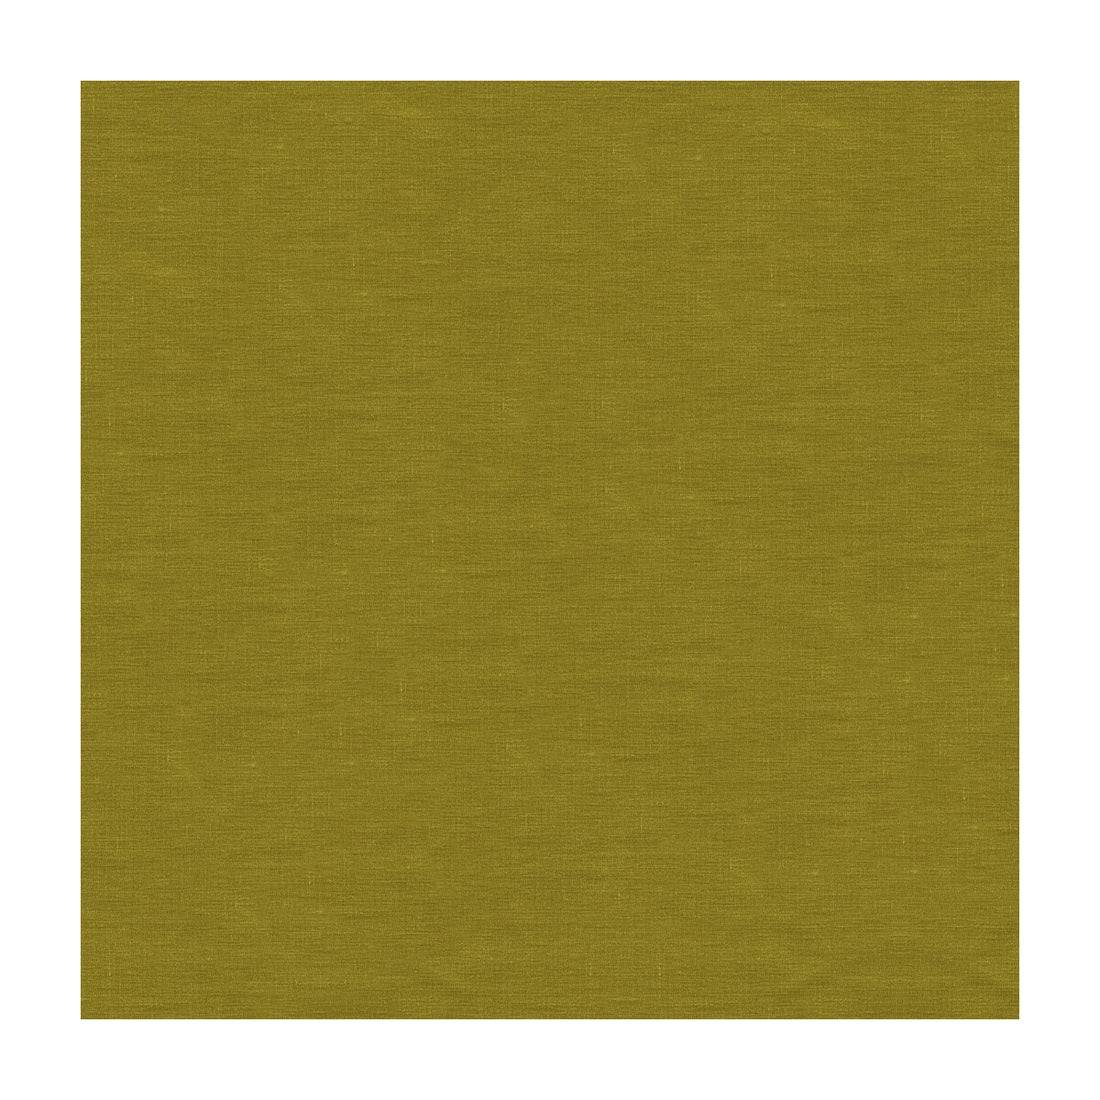 Star Fire fabric in olive color - pattern 33004.23.0 - by Kravet Couture in the Michael Berman II Collection collection